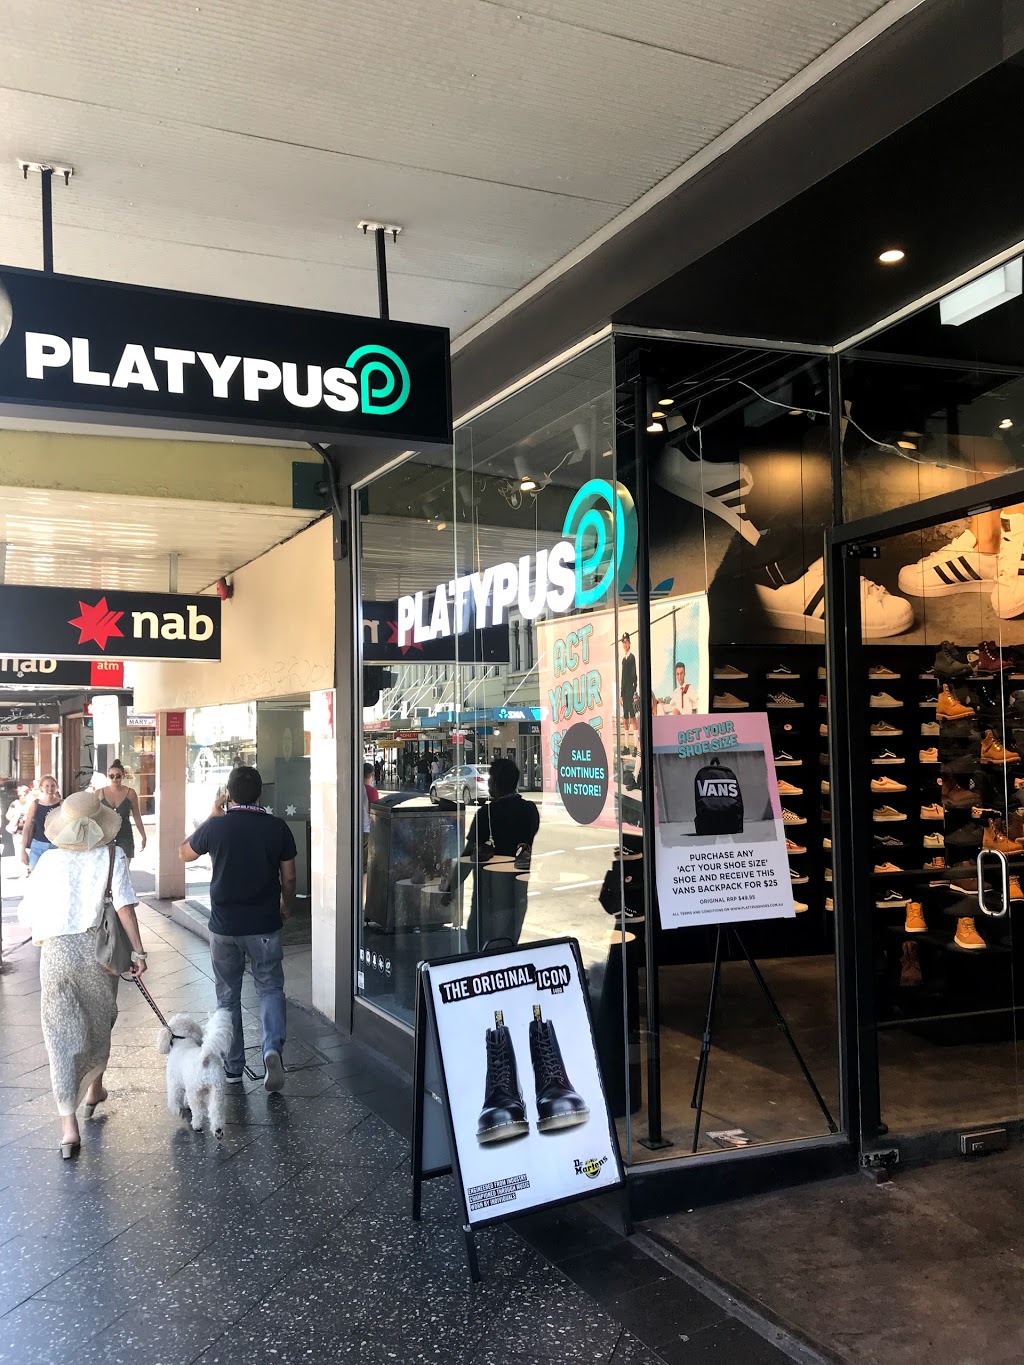 Platypus Shoes | shoe store | 275 King St, Newtown NSW 2042, Australia | 0295654594 OR +61 2 9565 4594